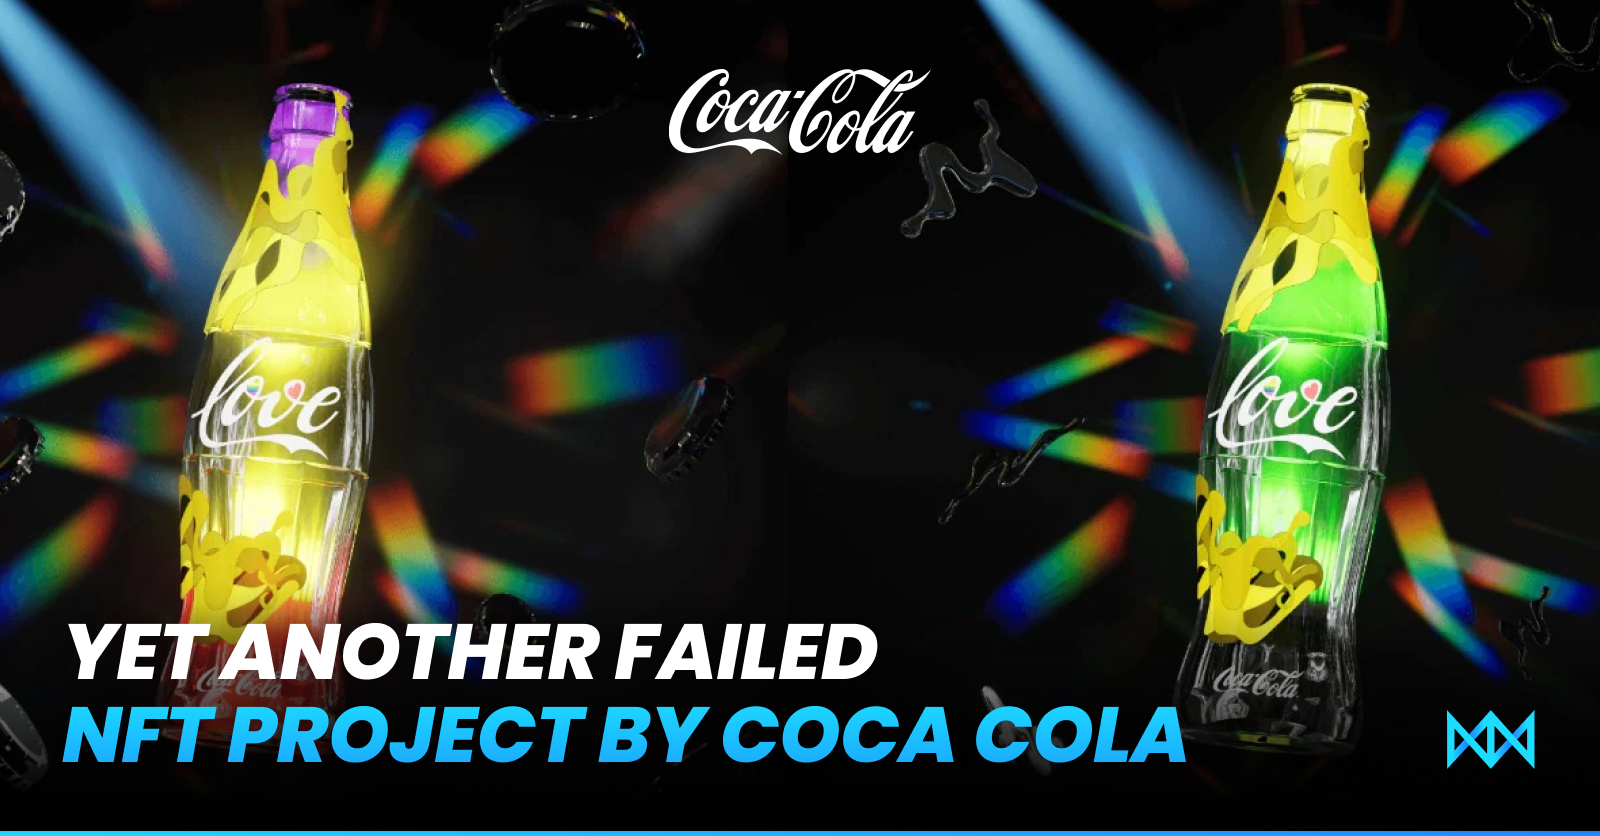 Yet another failed NFT project by Coca-Cola